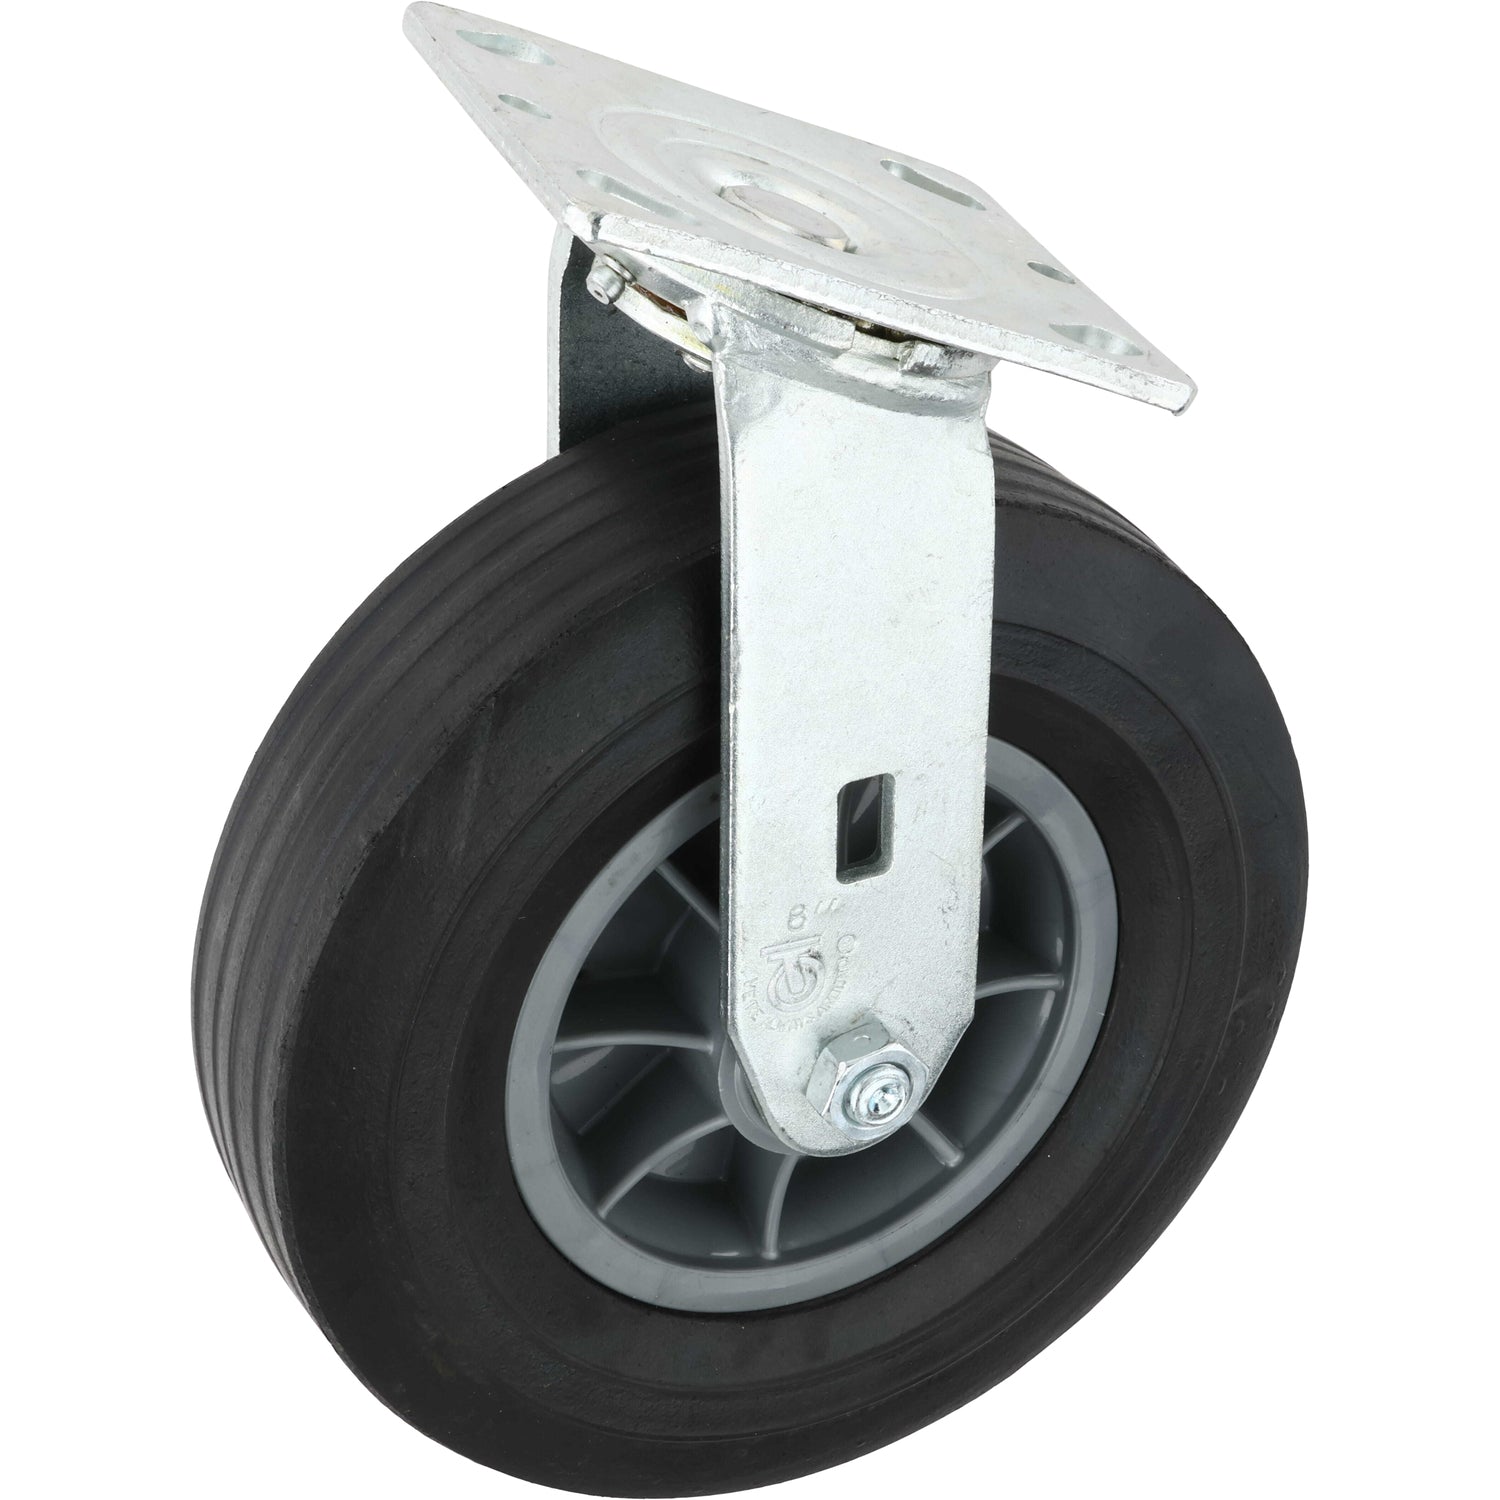 Swivel Caster with black rubber wheel material on white background.